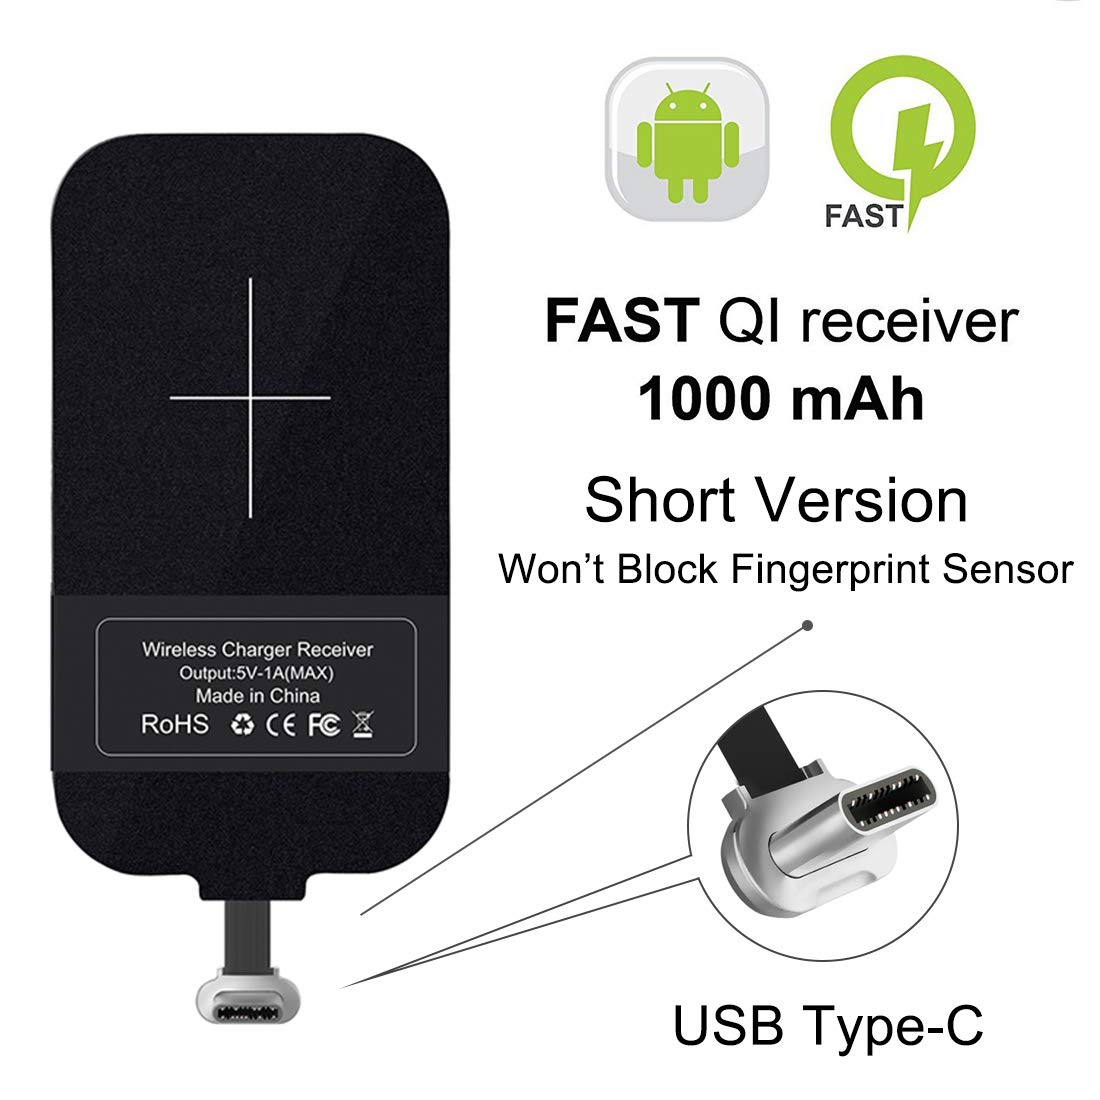 HF-U3-WCR: Wireless Charging Receiver,QI Wireless Charger Receiver Module with Type-C